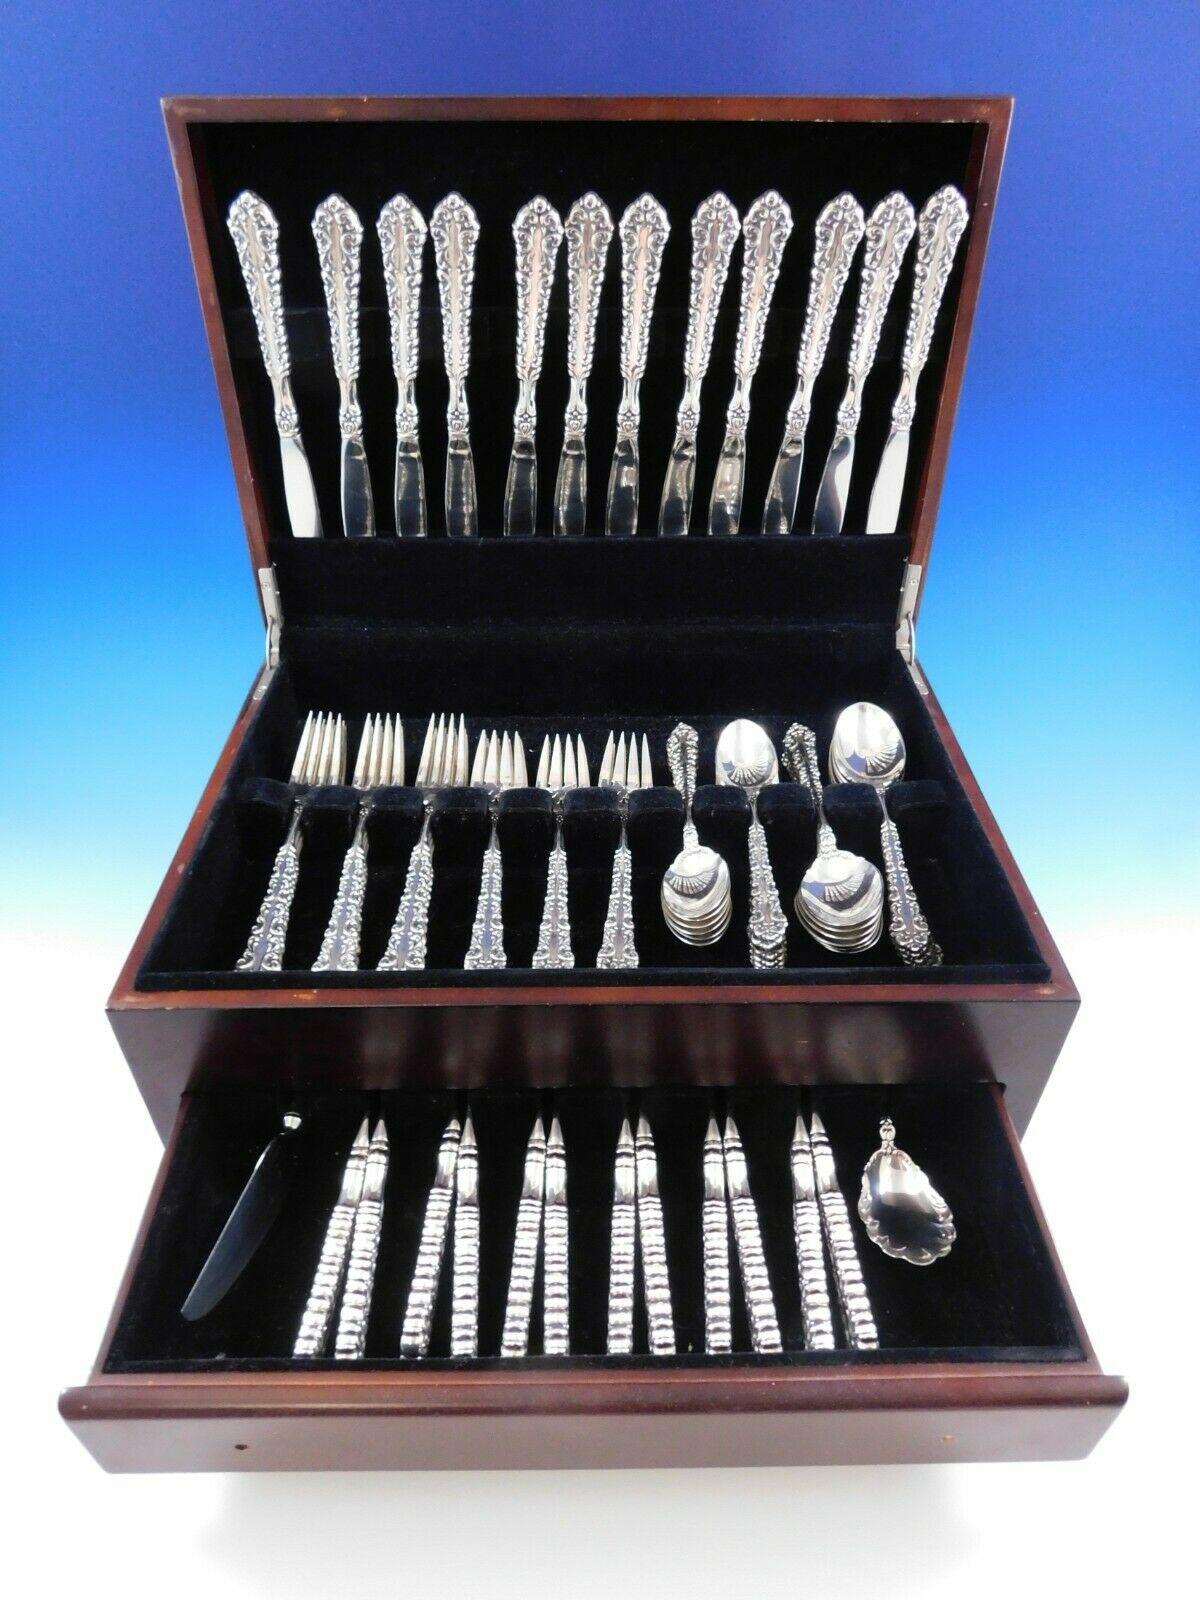 Venetian Scroll by Heirloom-Oneida sterling silver flatware set - 74 pieces. This set includes:


12 knives, 9 1/8